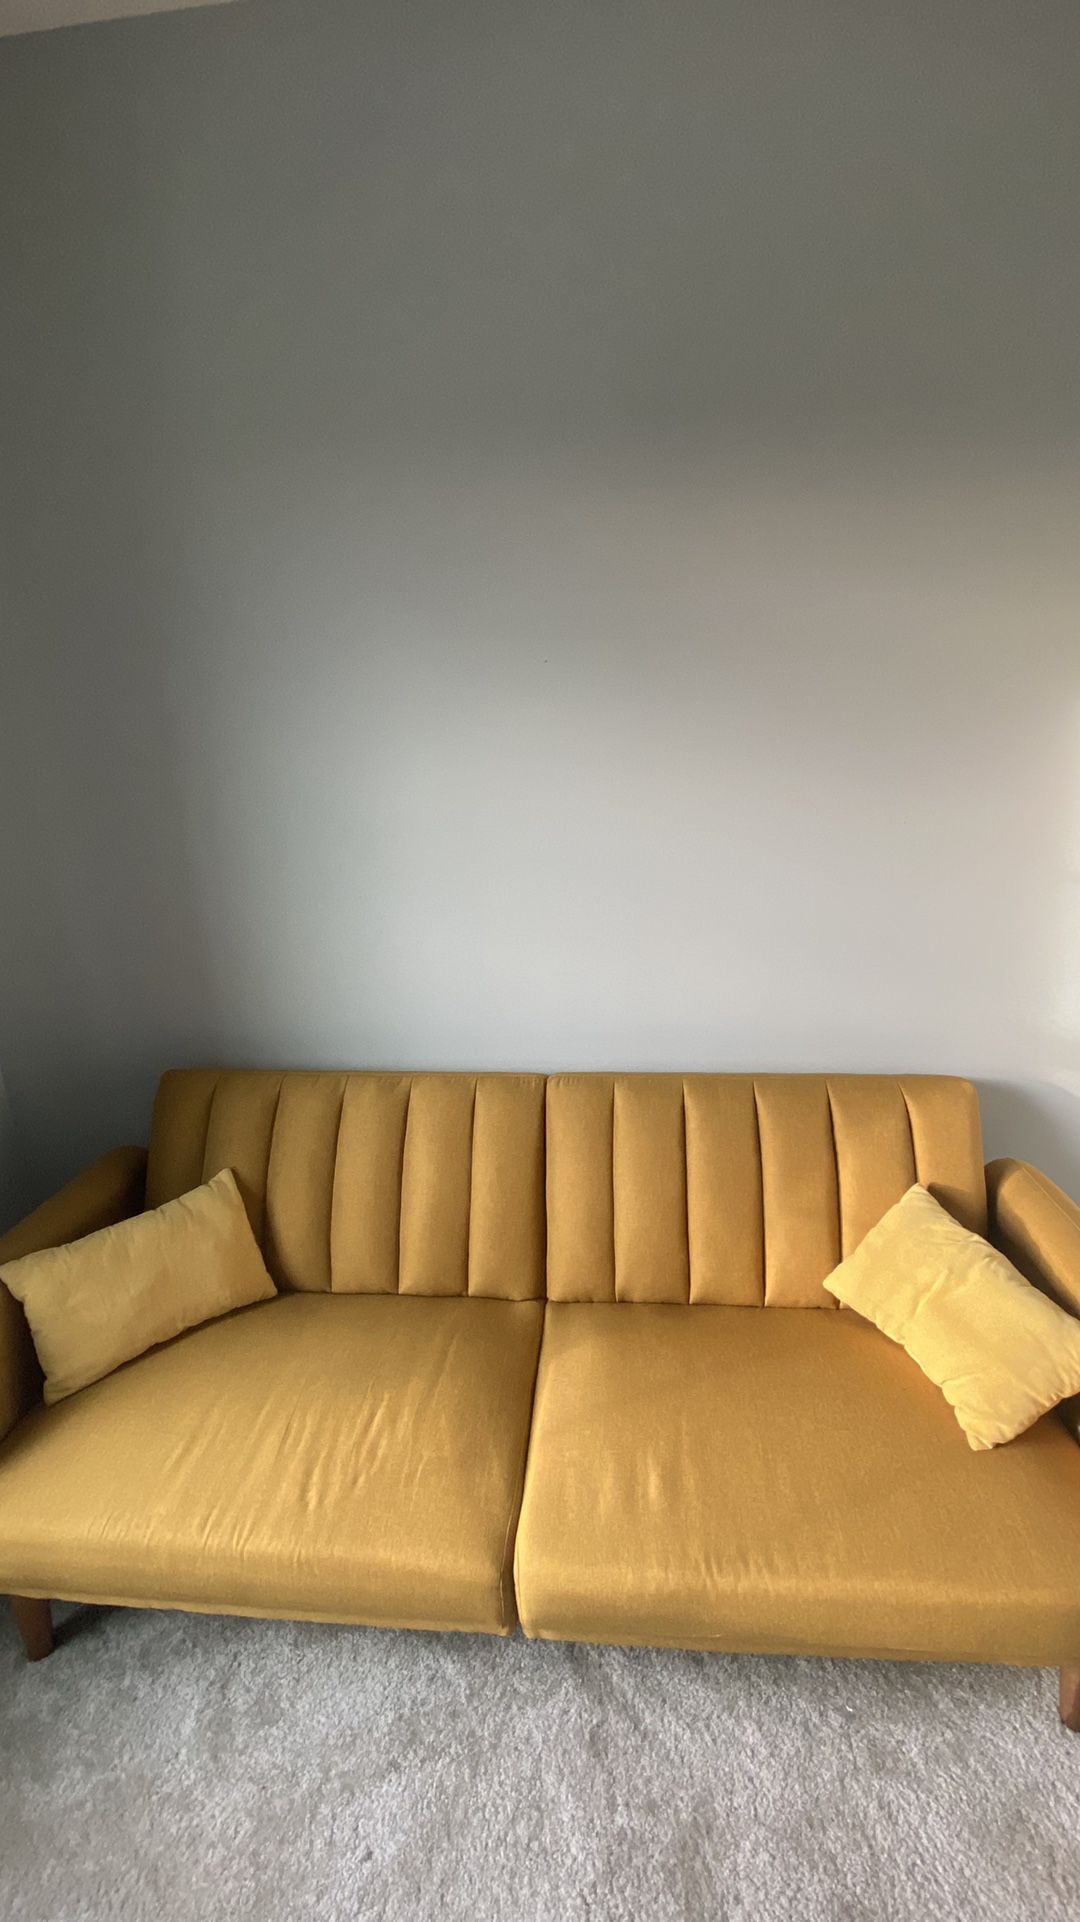 Twin size mustard yellow futon, excellent condition